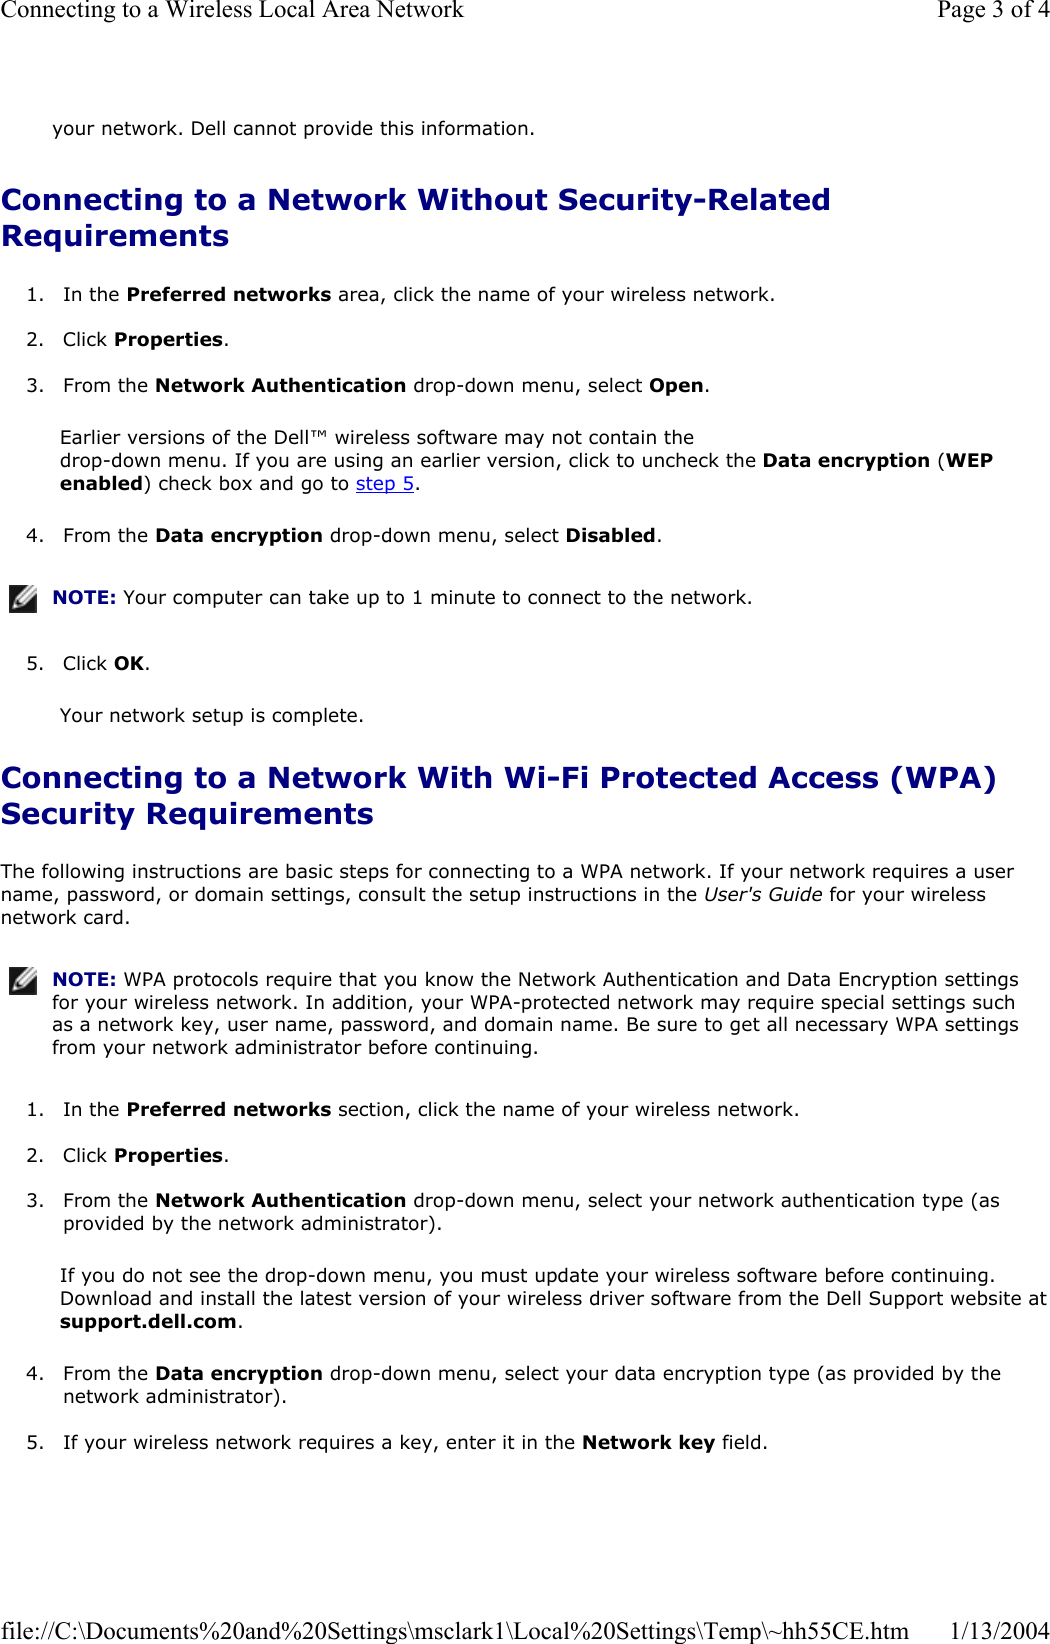 Connecting to a Network Without Security-Related Requirements1. In the Preferred networks area, click the name of your wireless network.  2. Click Properties.3. From the Network Authentication drop-down menu, select Open.Earlier versions of the Dell™ wireless software may not contain the  drop-down menu. If you are using an earlier version, click to uncheck the Data encryption (WEPenabled) check box and go to step 5.4. From the Data encryption drop-down menu, select Disabled.5. Click OK.Your network setup is complete. Connecting to a Network With Wi-Fi Protected Access (WPA) Security Requirements The following instructions are basic steps for connecting to a WPA network. If your network requires a user name, password, or domain settings, consult the setup instructions in the User&apos;s Guide for your wireless network card.  1. In the Preferred networks section, click the name of your wireless network.  2. Click Properties.3. From the Network Authentication drop-down menu, select your network authentication type (as provided by the network administrator). If you do not see the drop-down menu, you must update your wireless software before continuing. Download and install the latest version of your wireless driver software from the Dell Support website atsupport.dell.com.4. From the Data encryption drop-down menu, select your data encryption type (as provided by the network administrator).  5. If your wireless network requires a key, enter it in the Network key field.  your network. Dell cannot provide this information.NOTE: Your computer can take up to 1 minute to connect to the network.NOTE: WPA protocols require that you know the Network Authentication and Data Encryption settings for your wireless network. In addition, your WPA-protected network may require special settings such as a network key, user name, password, and domain name. Be sure to get all necessary WPA settings from your network administrator before continuing.Page 3 of 4Connecting to a Wireless Local Area Network1/13/2004file://C:\Documents%20and%20Settings\msclark1\Local%20Settings\Temp\~hh55CE.htm